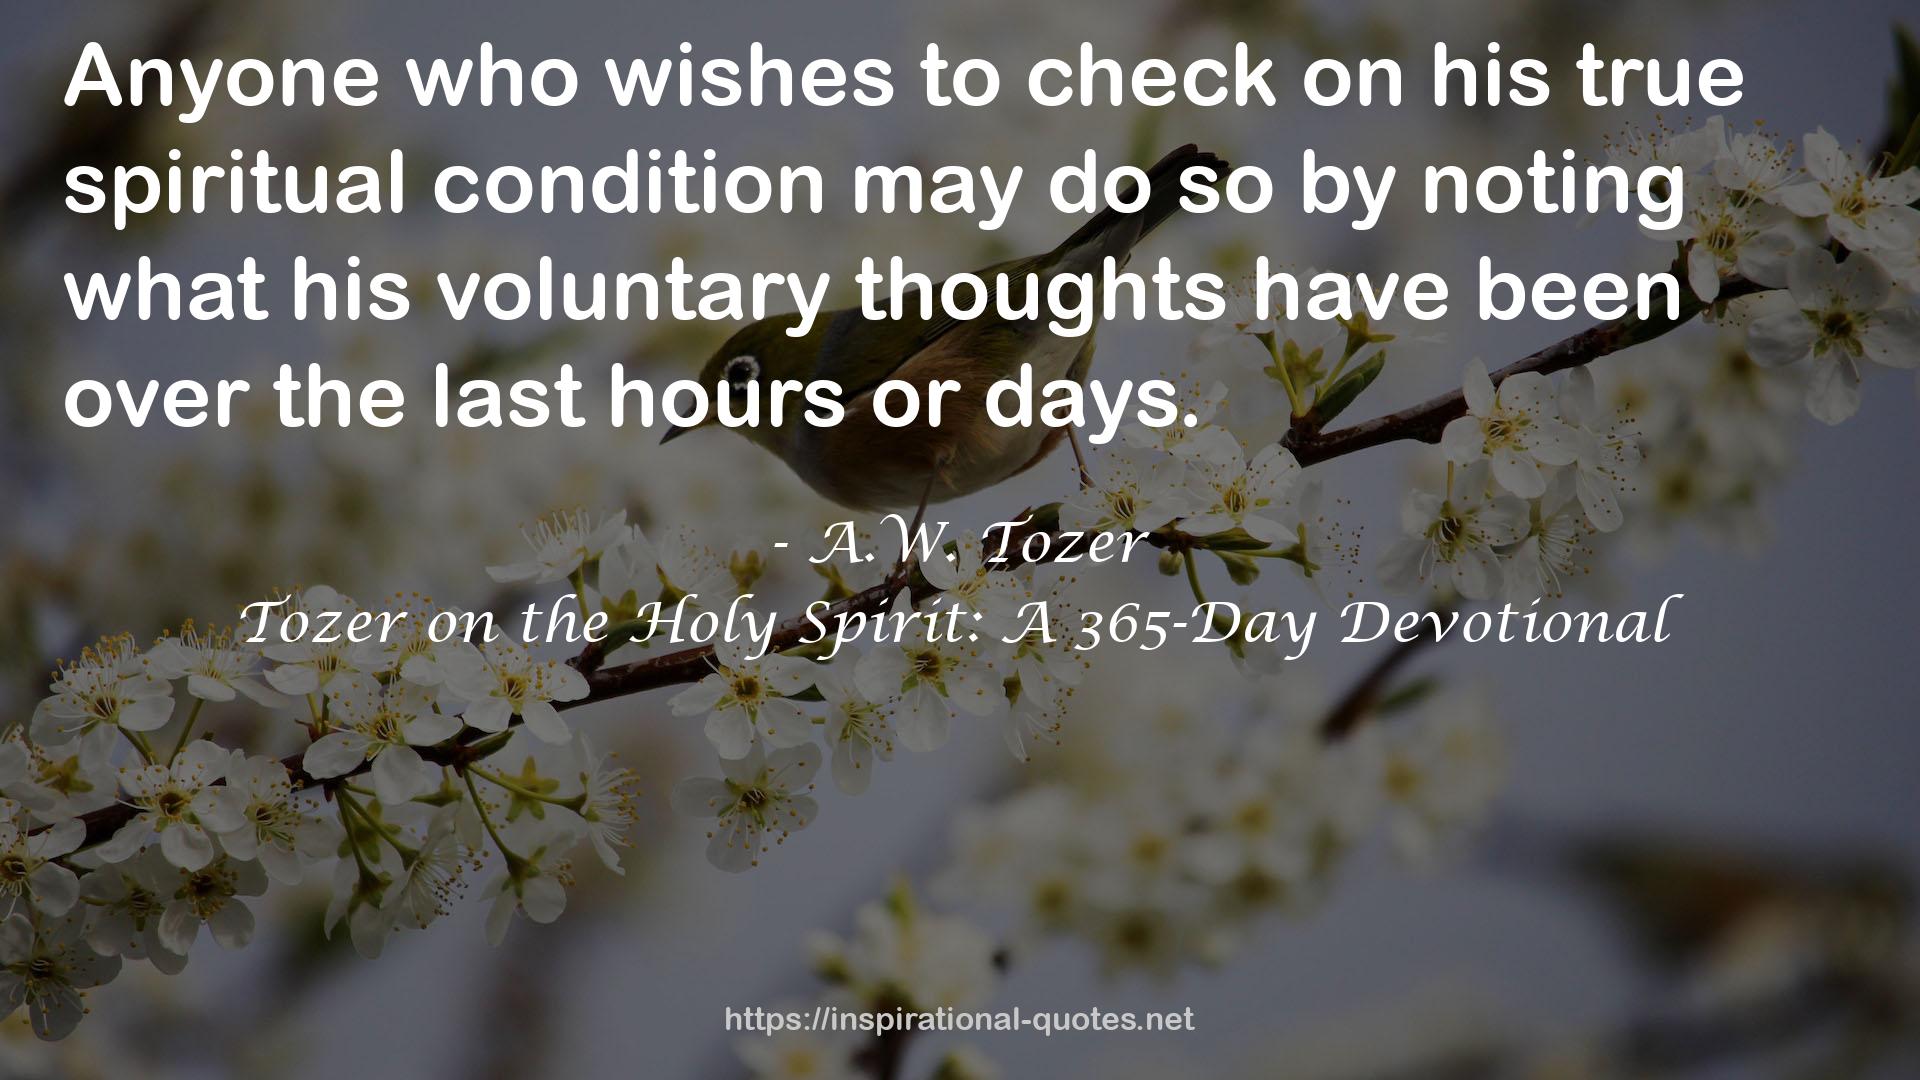 Tozer on the Holy Spirit: A 365-Day Devotional QUOTES